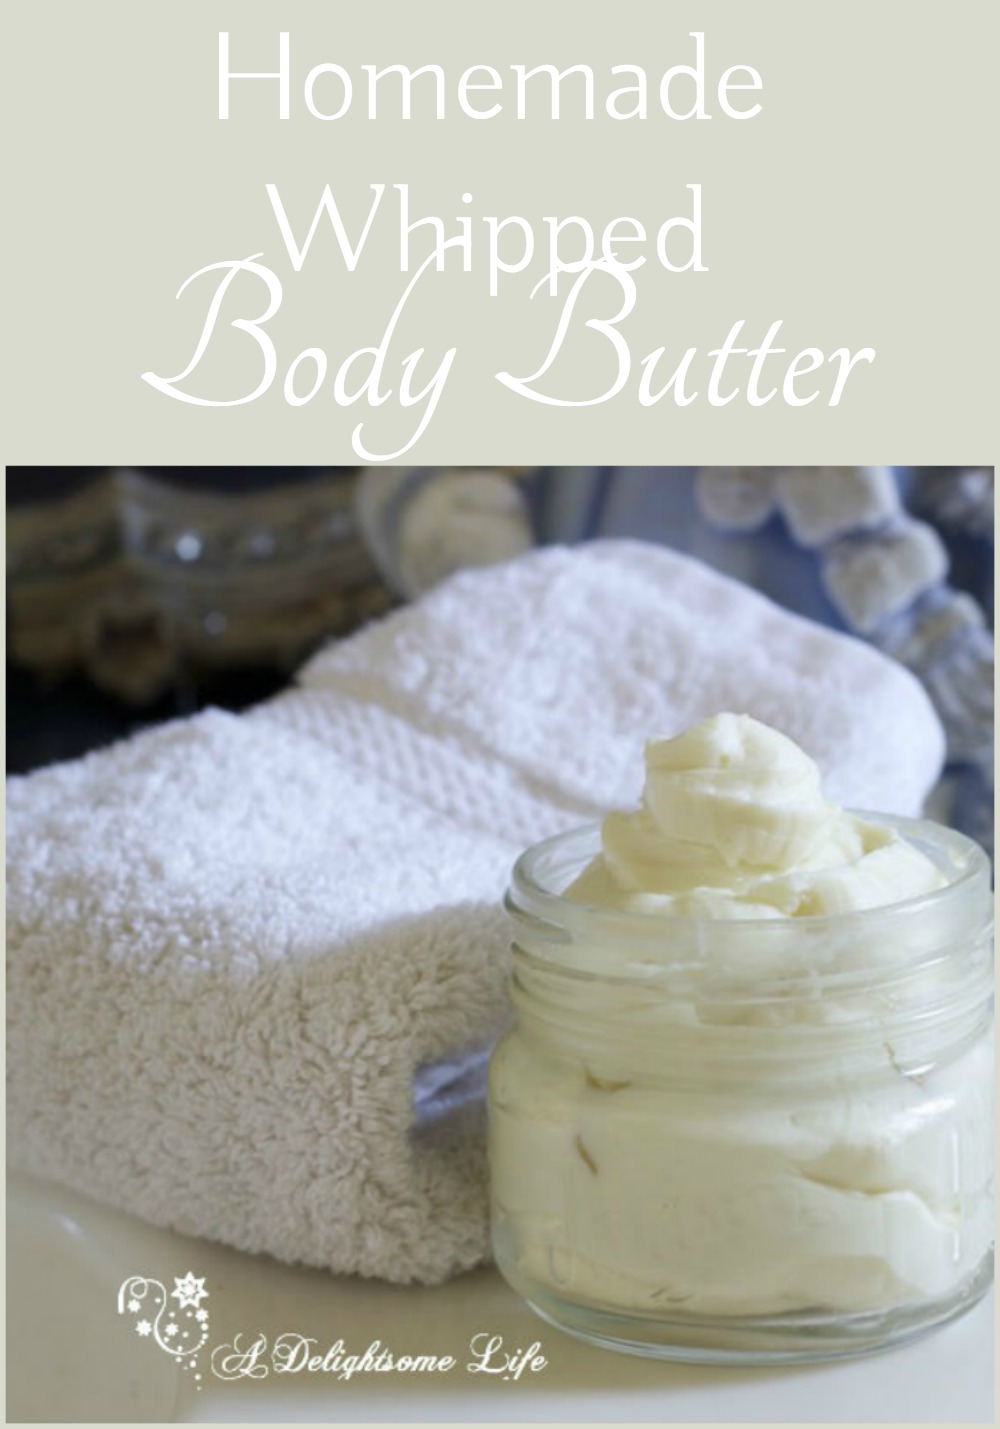 Homemade Body Butter Kit  All you need to make whipped shea